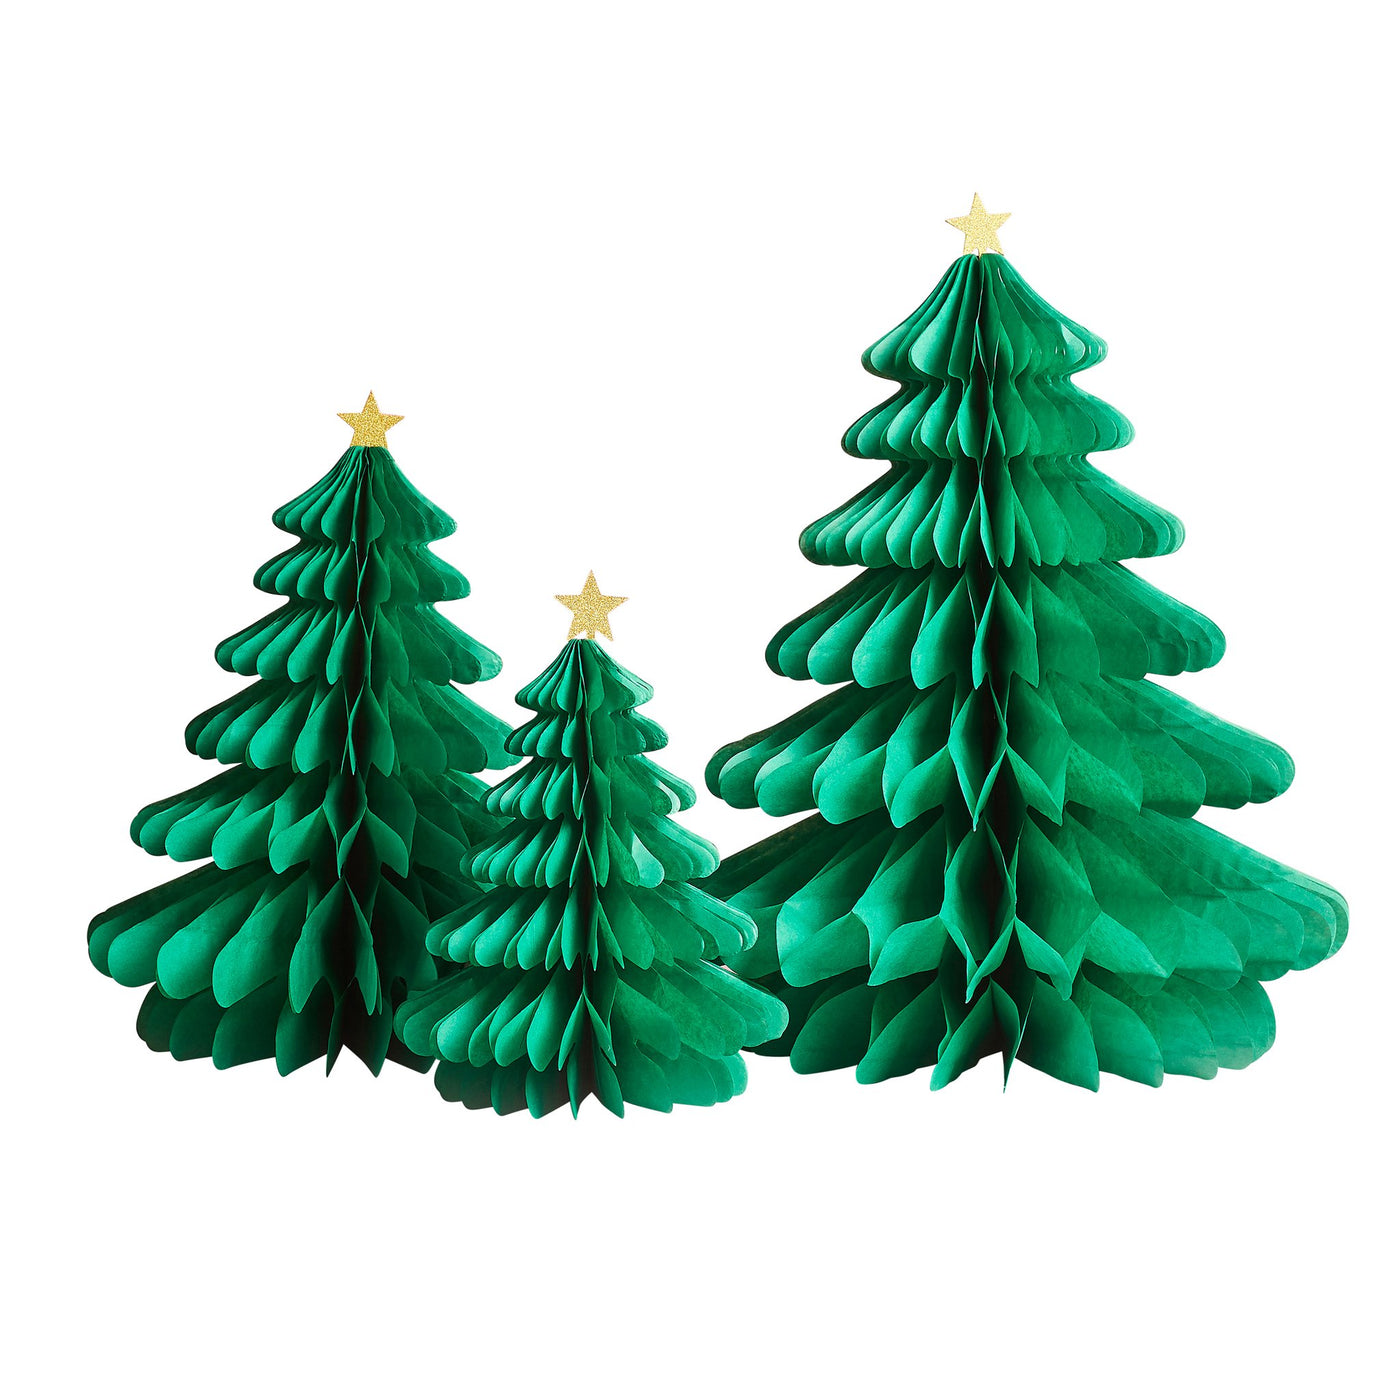 Honeycomb Christmas Trees 3 Pack